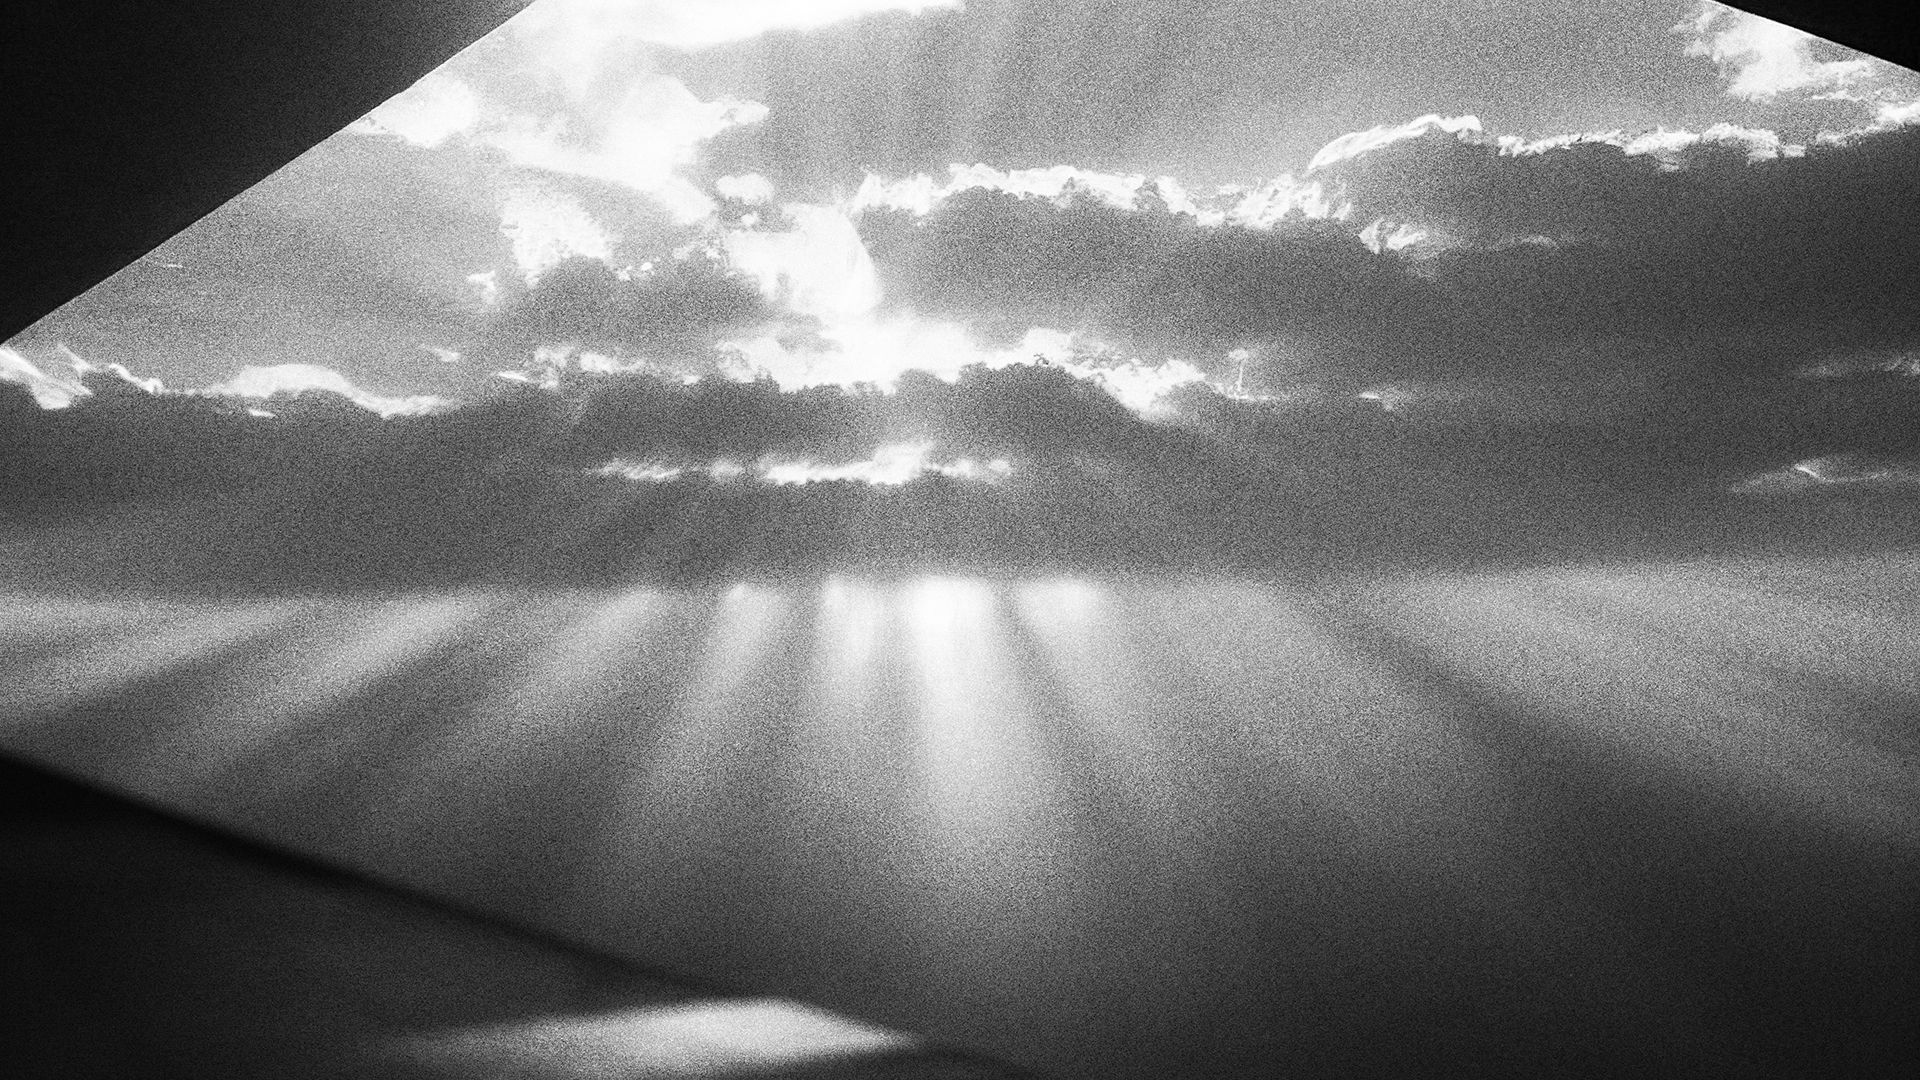 A black and white photo where a new world's sky is visible beyond the screen spread out like a movie theater, and light is shining.